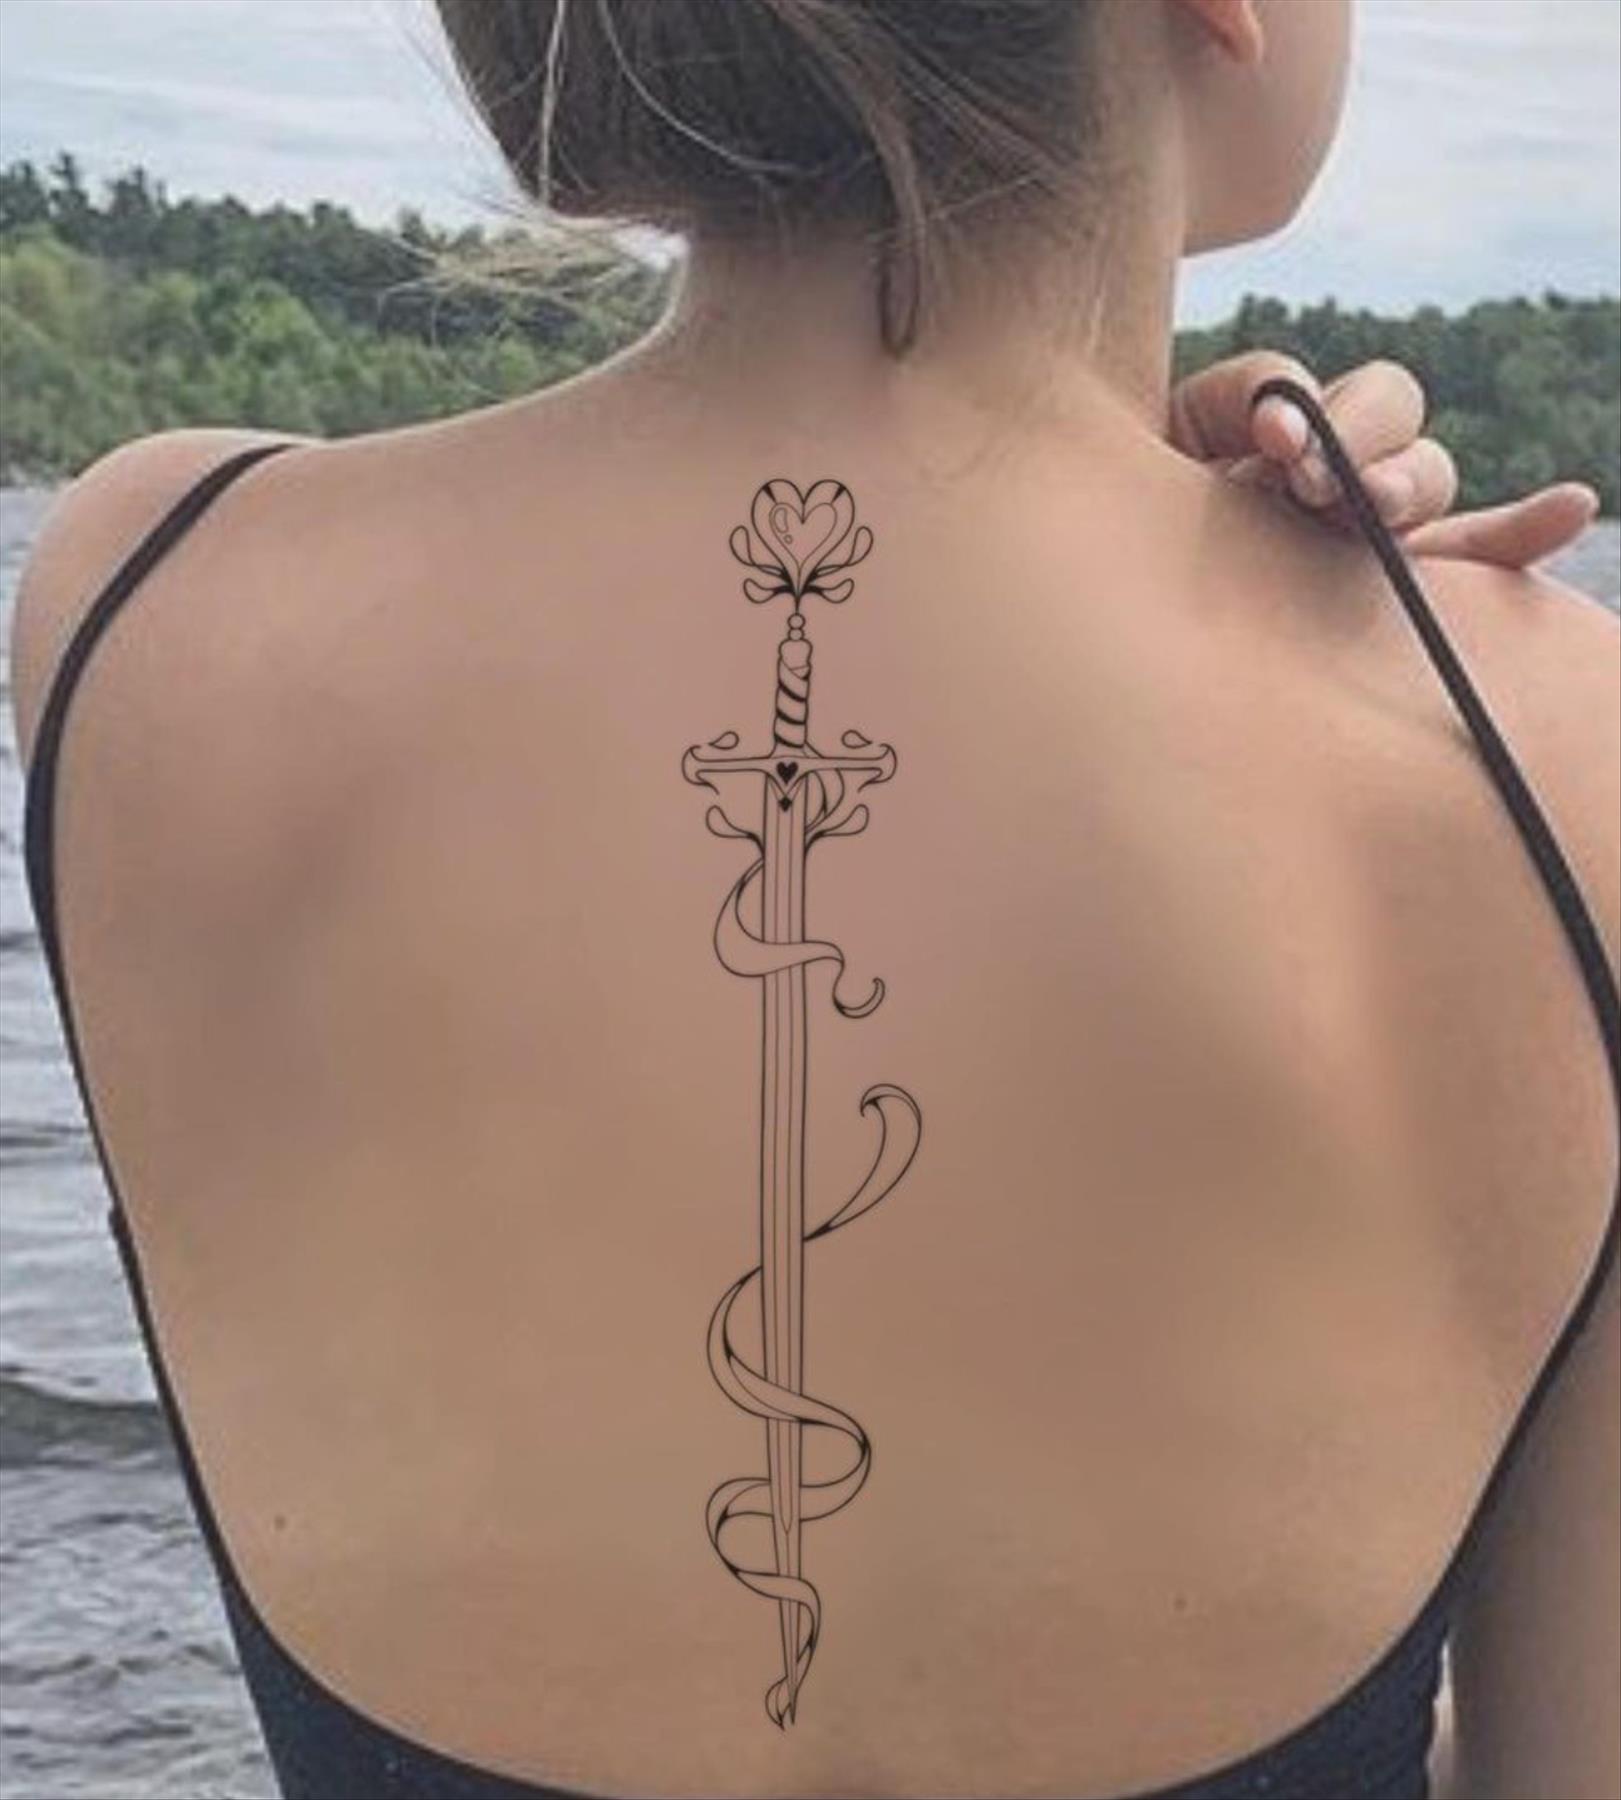  Pretty back tattoos for women inspirations 